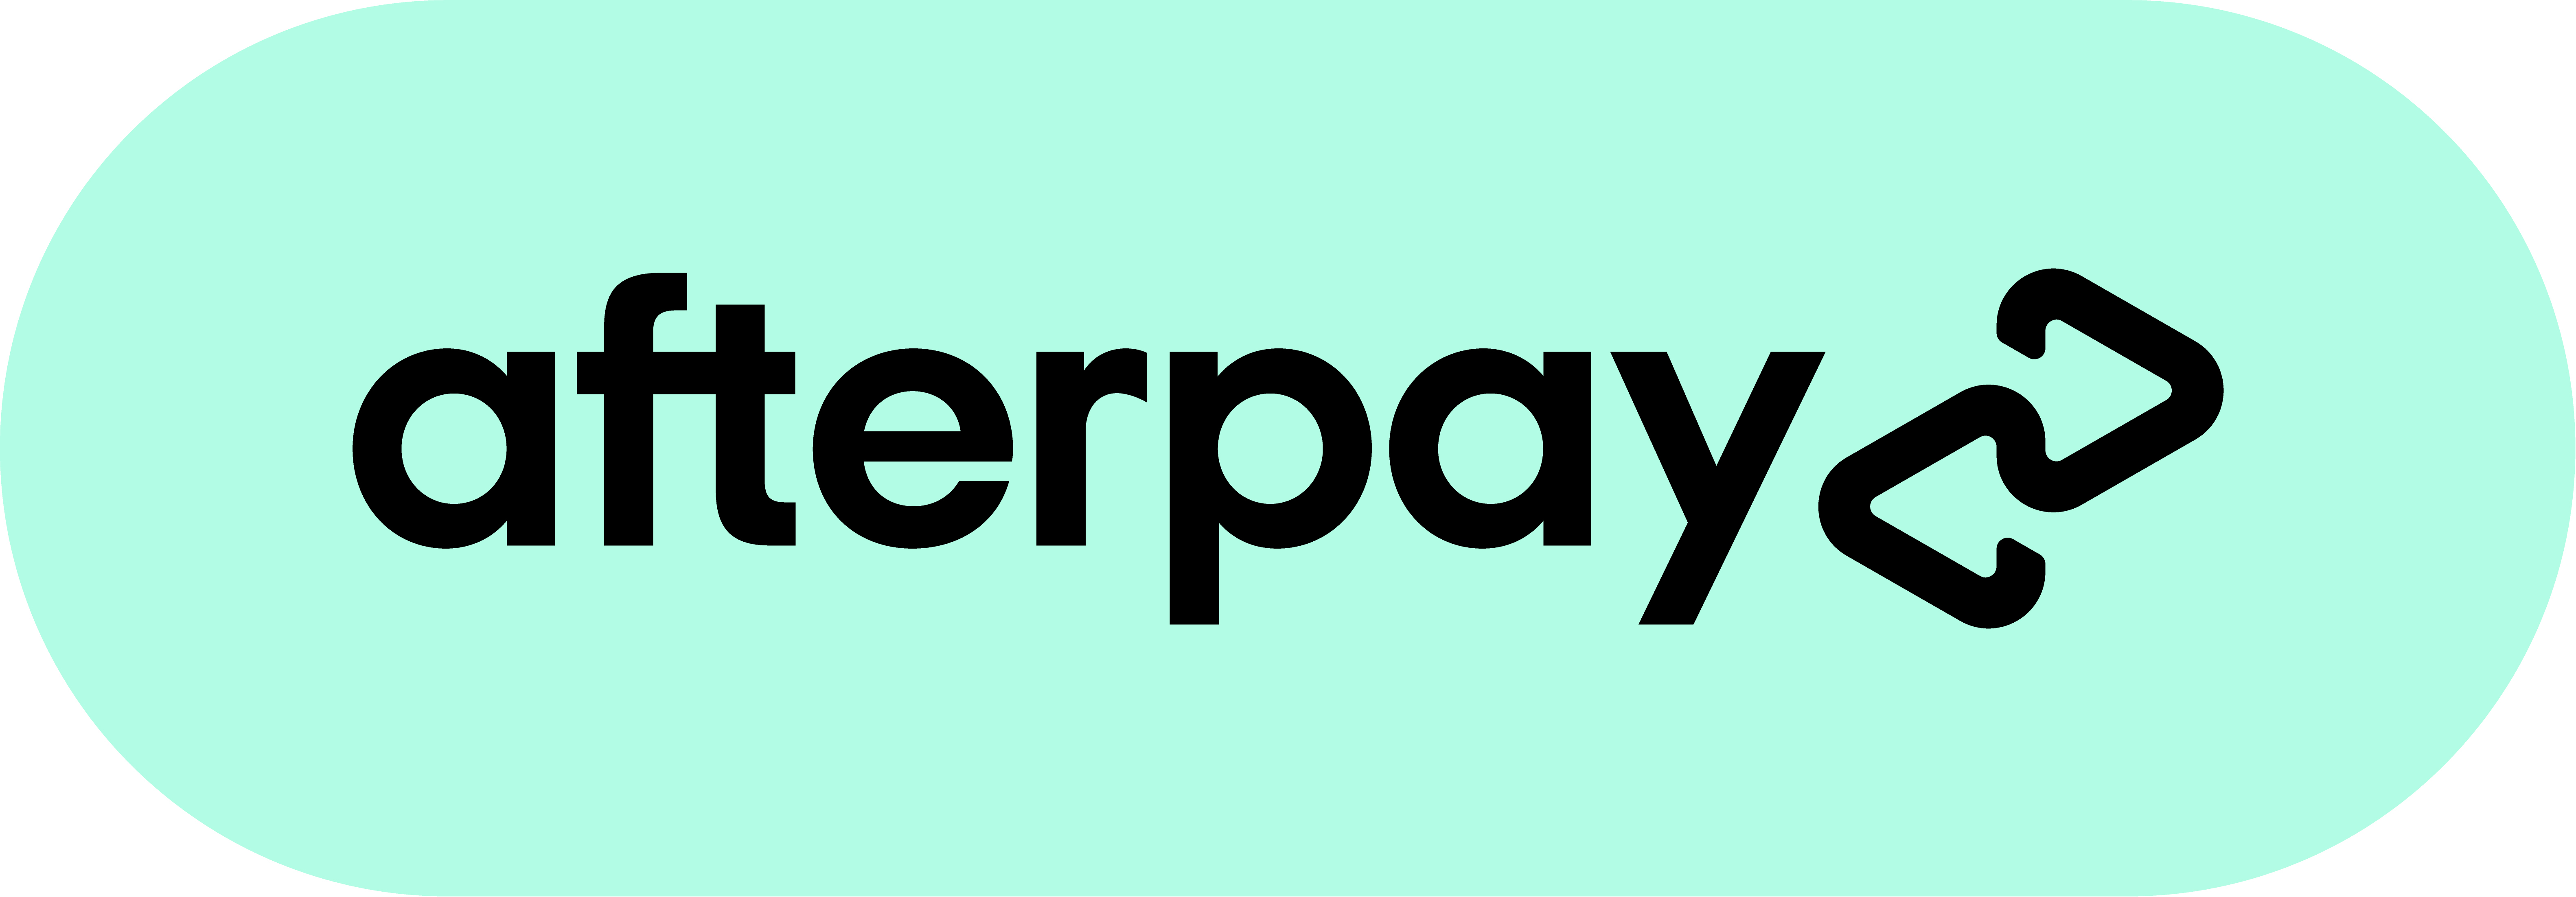 afterpay-2.jpg